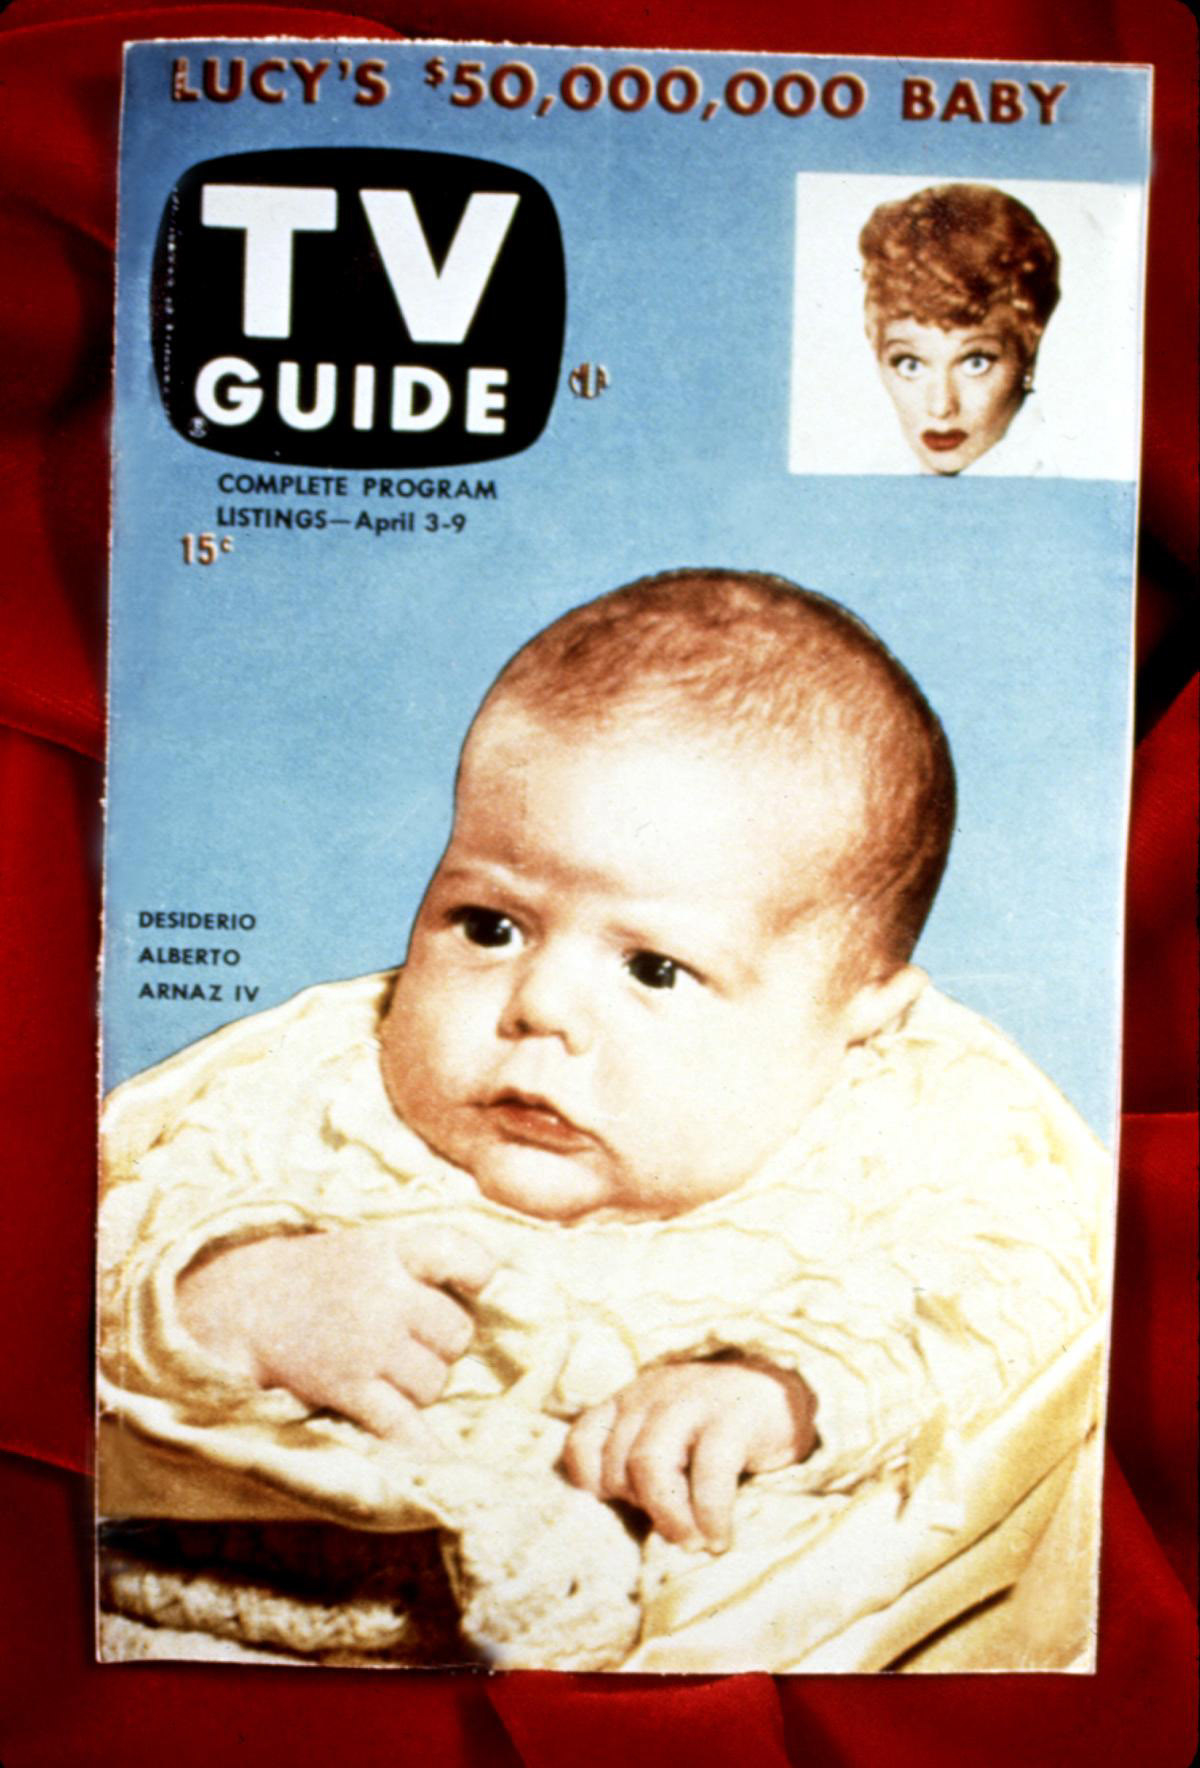 TV Guide cover from April 3-9 featuring a baby Desiderio Alberto Arnaz IV and a small image of Lucille Ball with text reading &quot;Lucy&#x27;s $50,000,000 Baby.&quot;